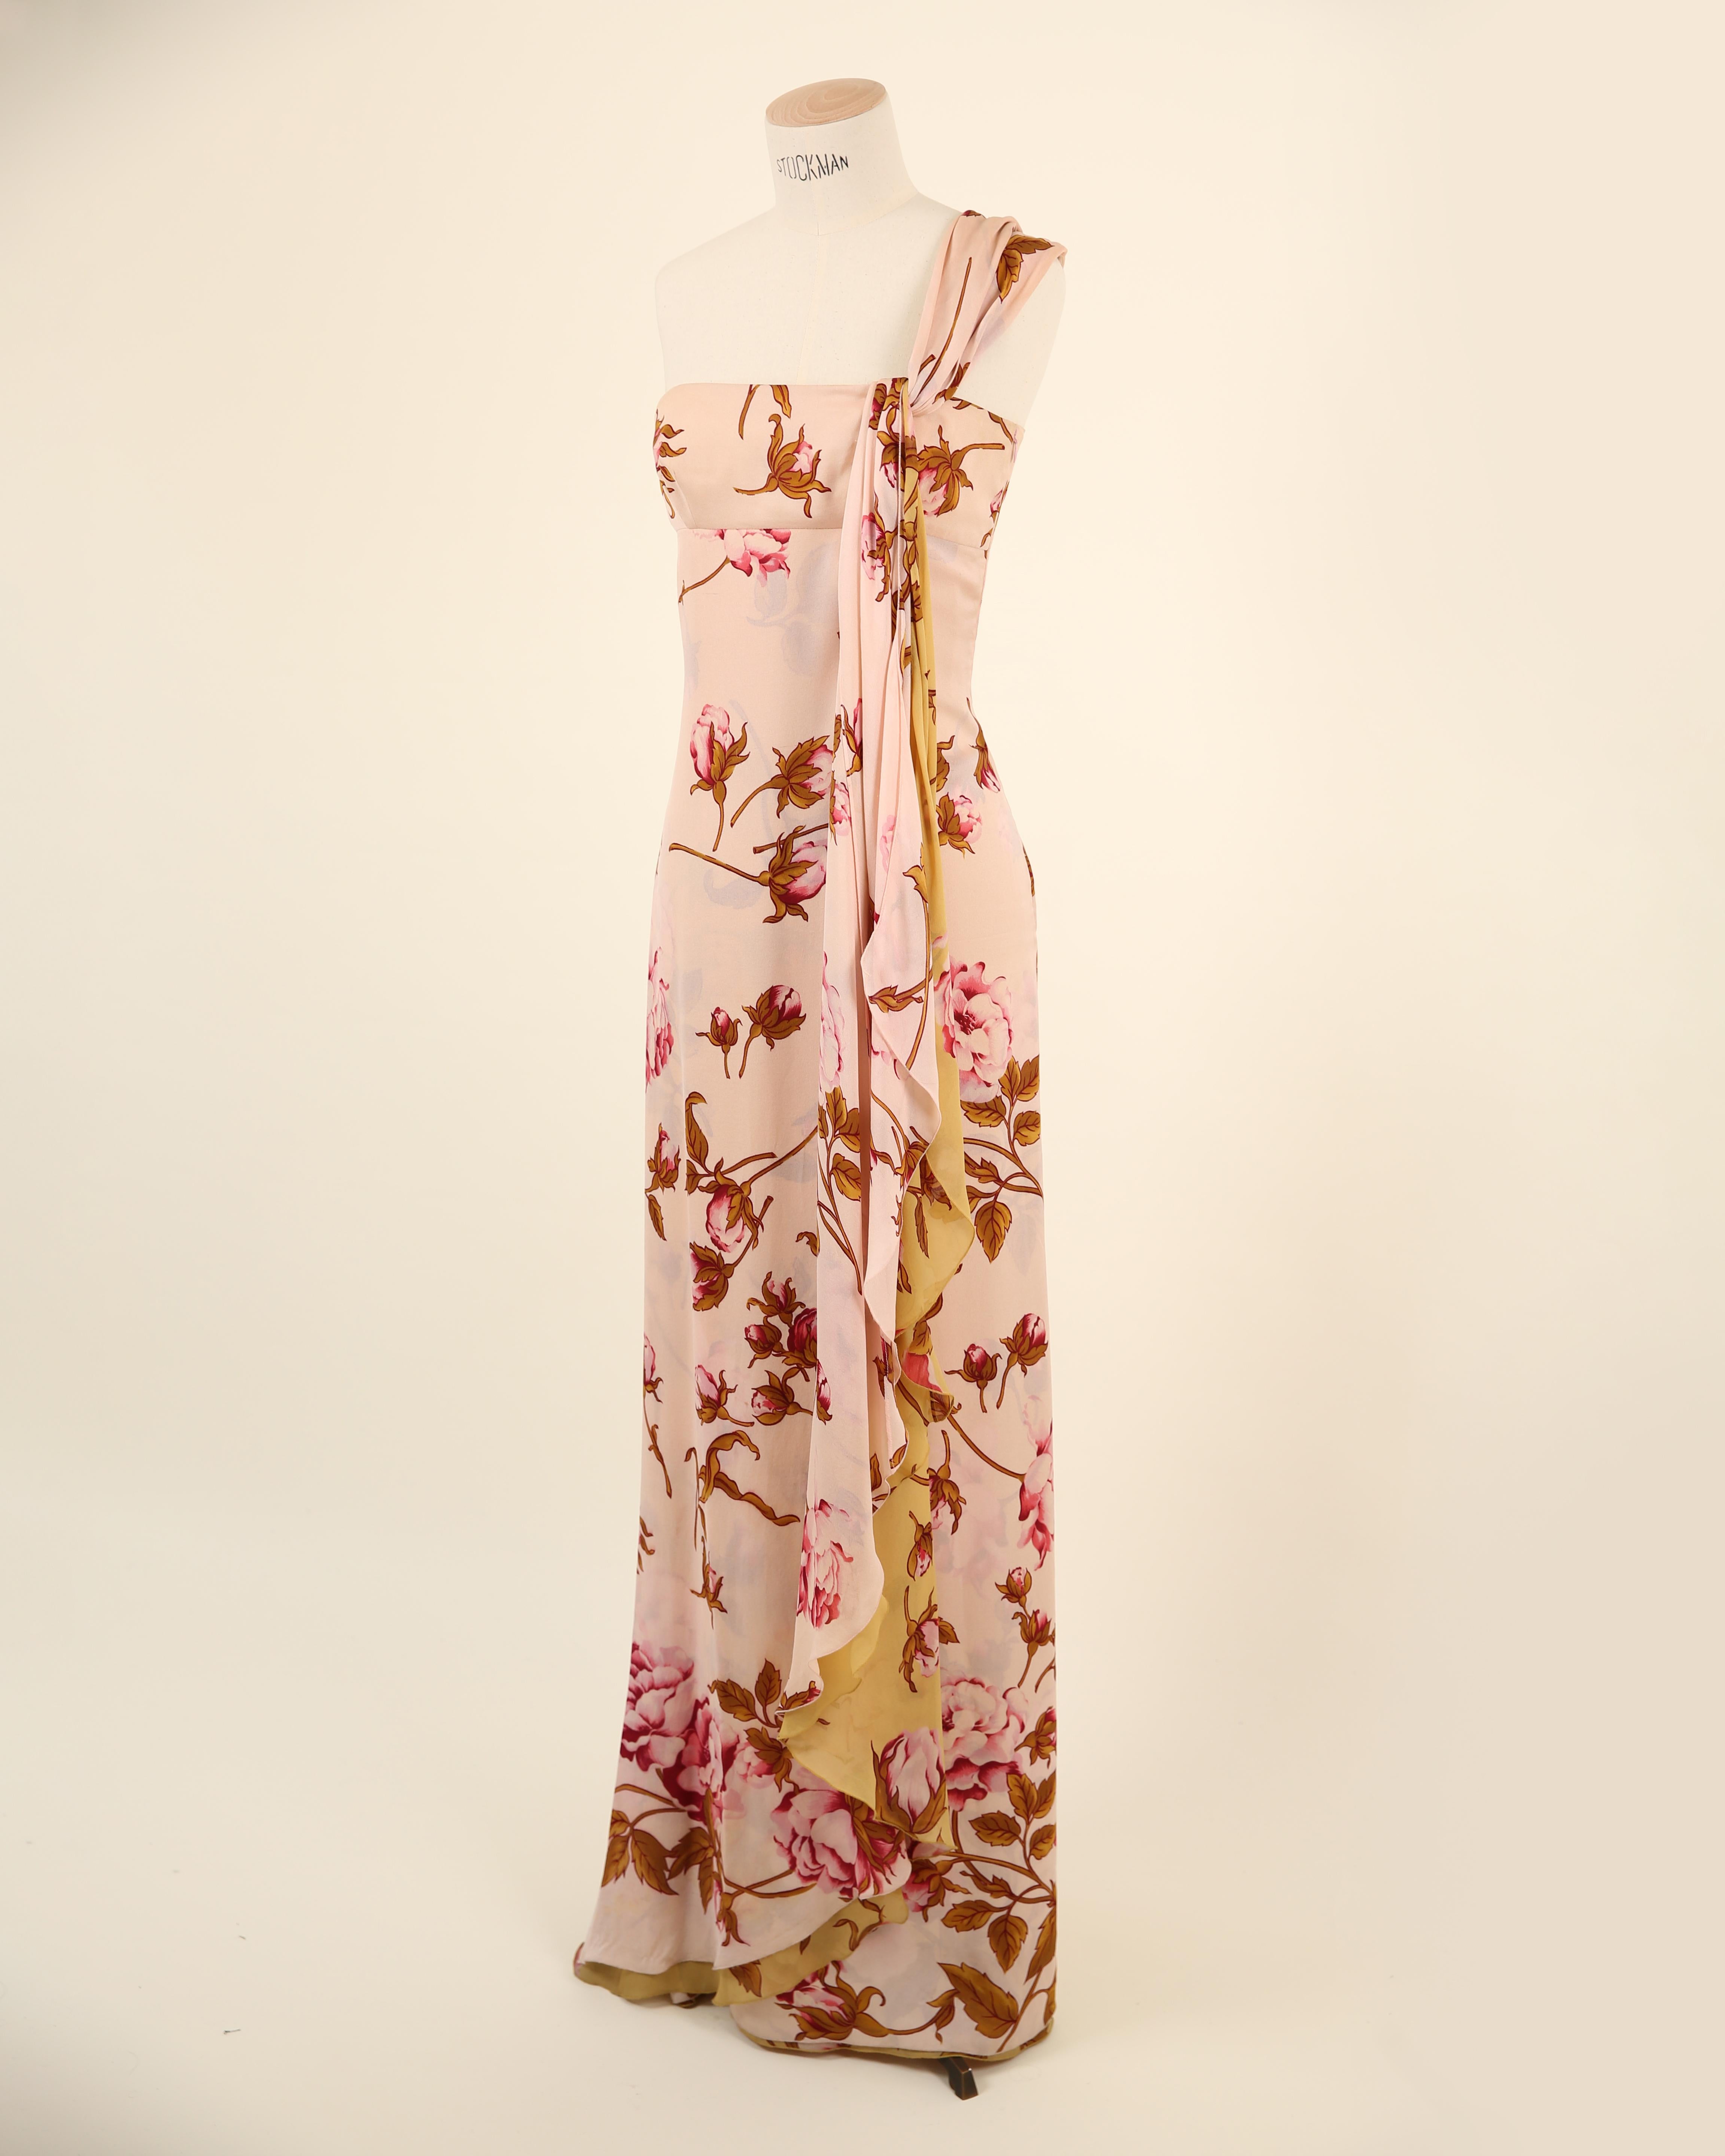 Valentino S/S 06 pink yellow rose print floral one shoulder gown train dress For Sale 1